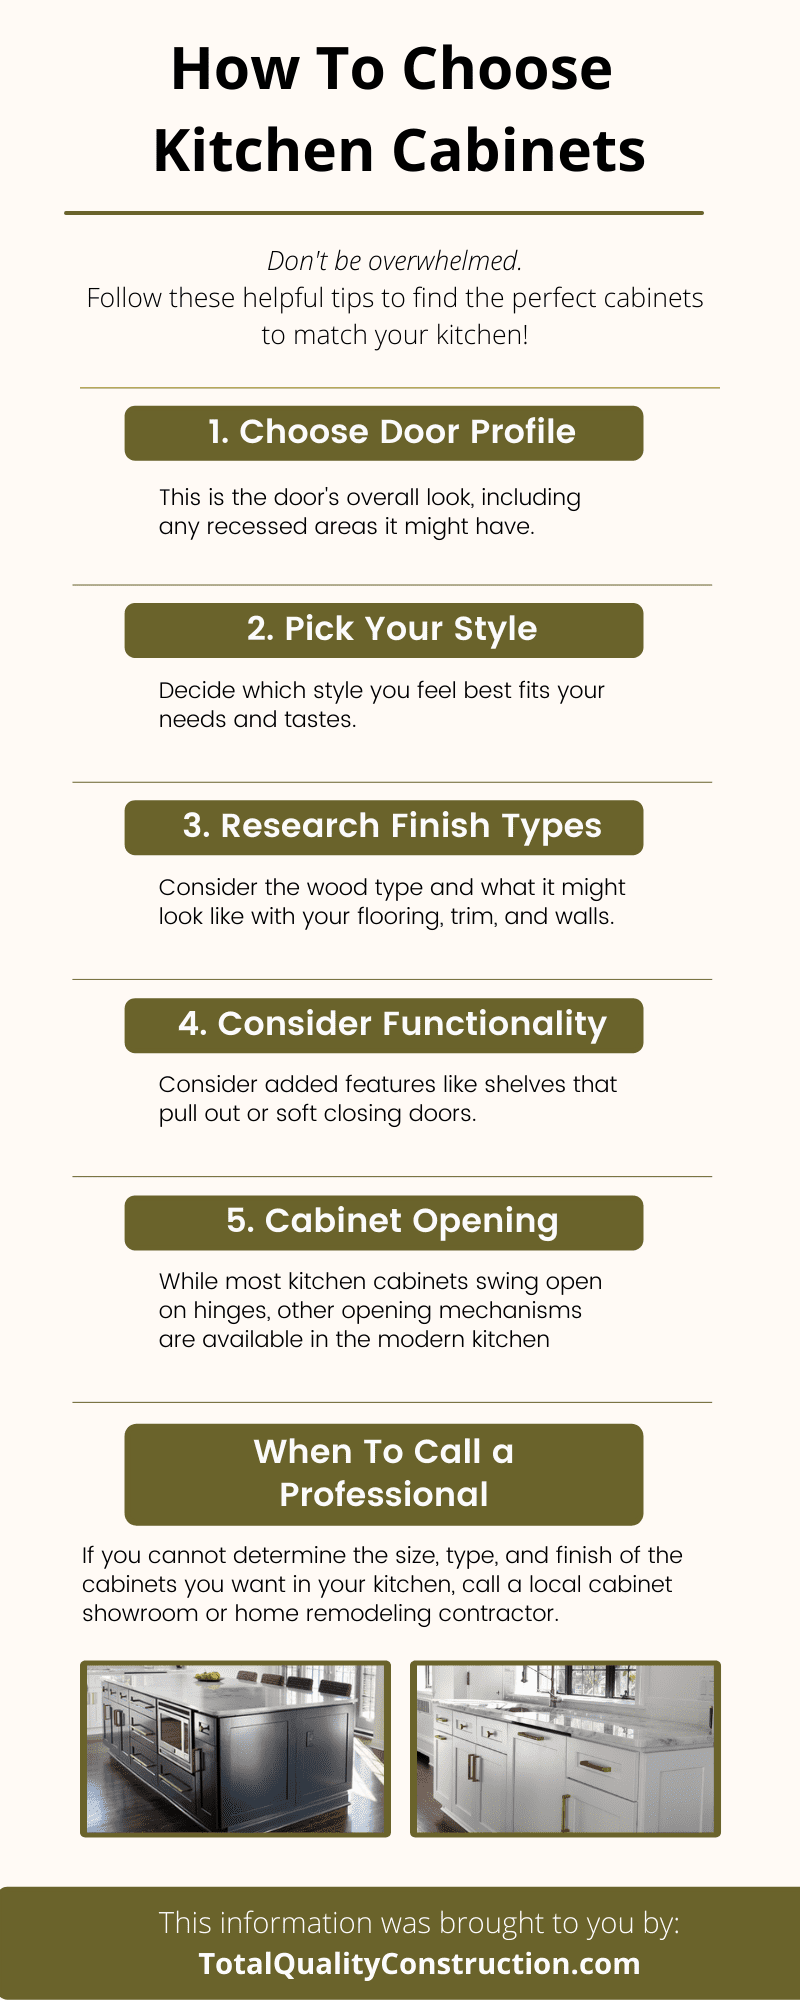 how-to-choose-kitchen-cabinets-infographic-total-quality-construction